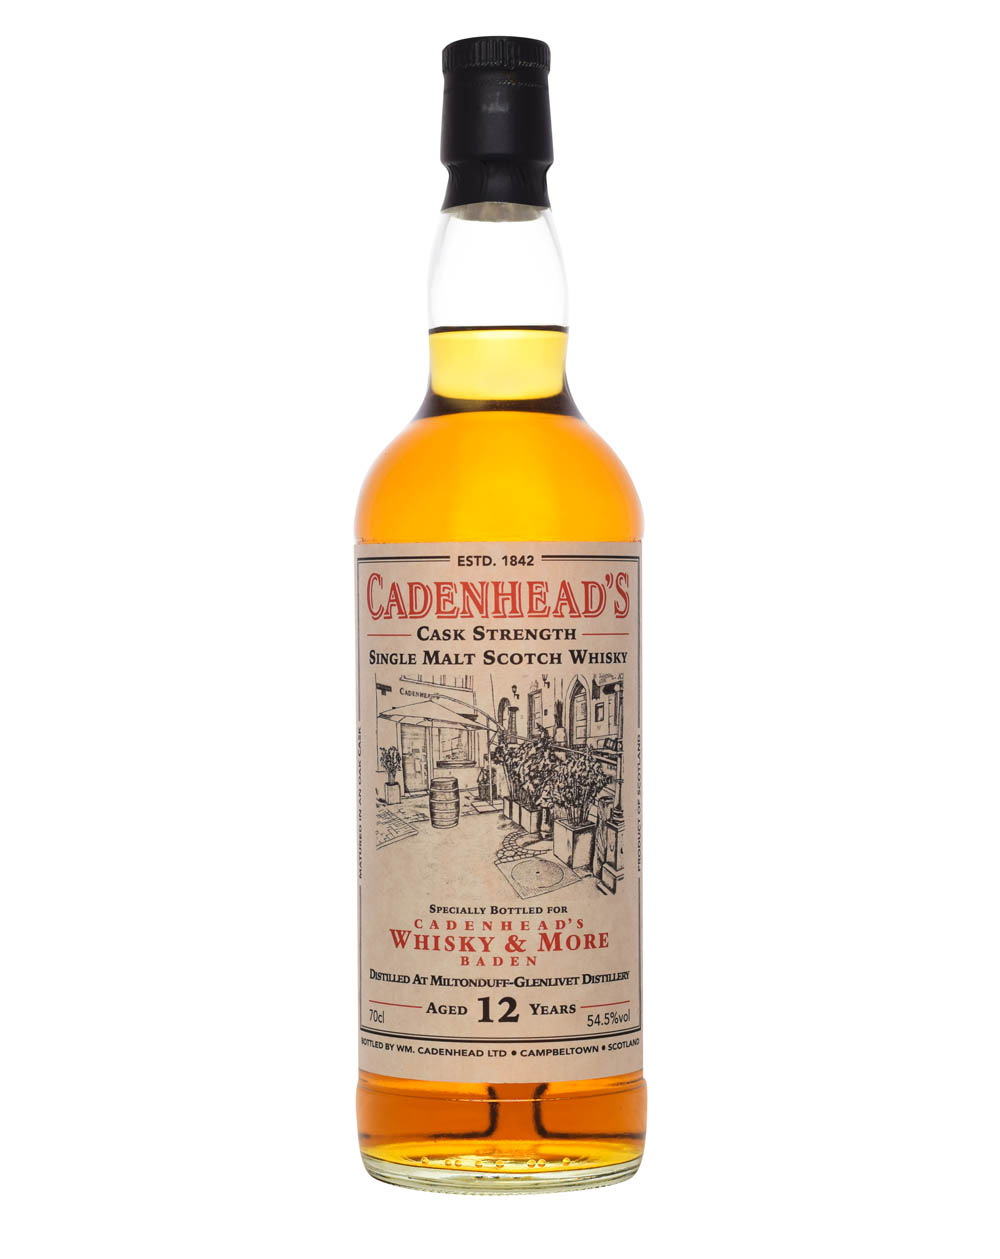 Miltonduff 12 Years Old Cadenhead's Whisky & More Baden Musthave Malts MHM